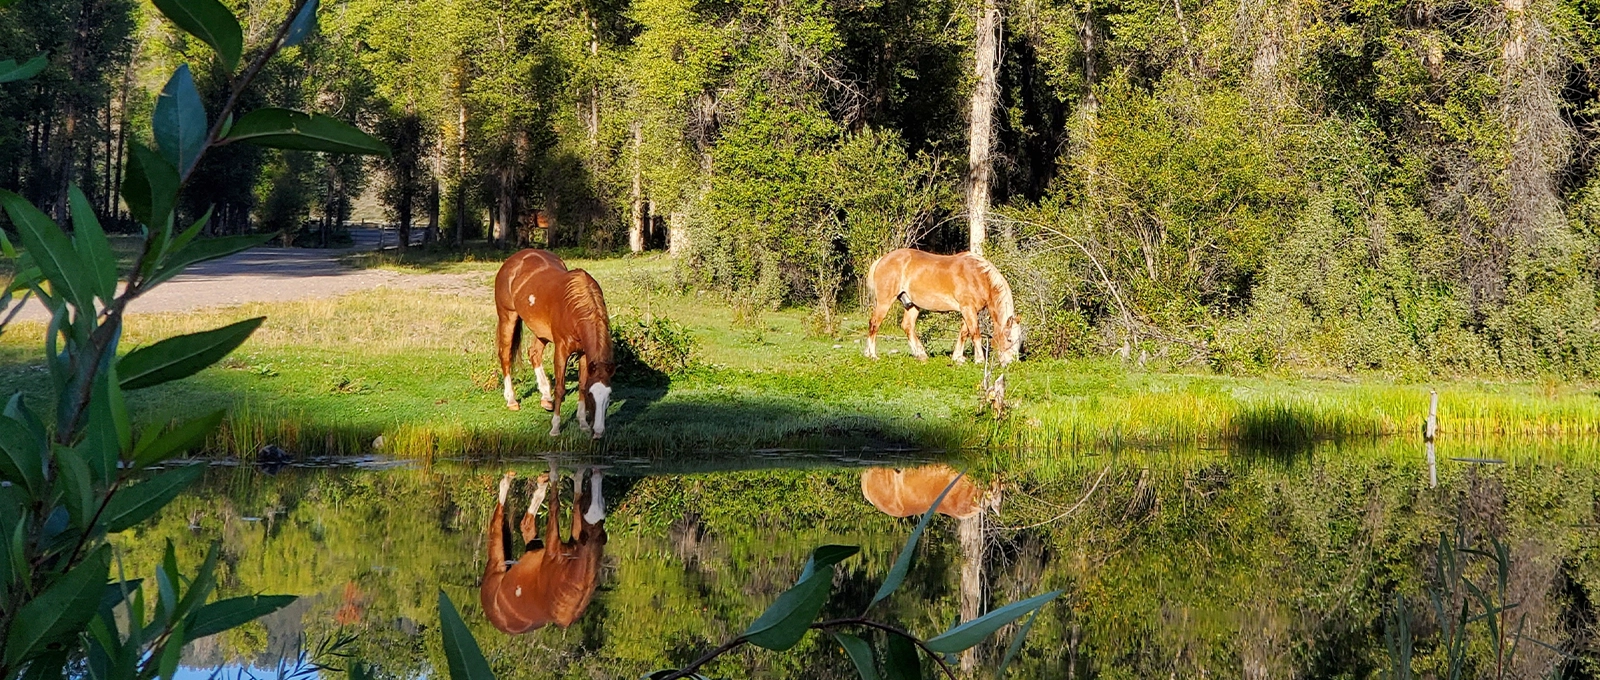 Two Draft Horses Take A Drink From A Pond During The Summertime At Tipi Camp In Jackson Hole Wyoming